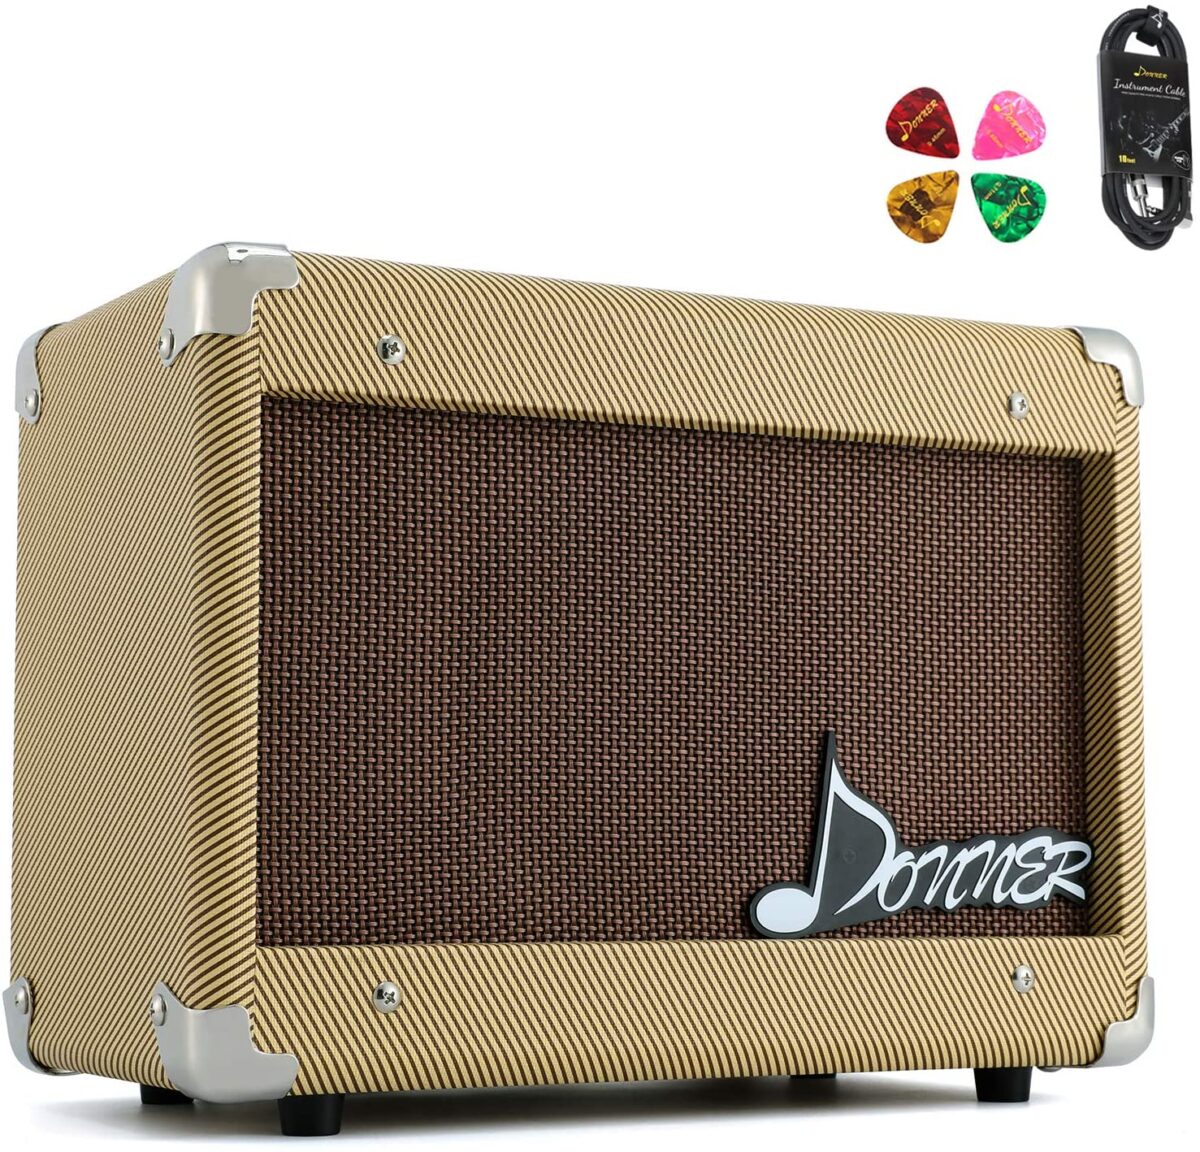 Top 5 Acoustic Guitar Amps That Are Pocket-Friendly